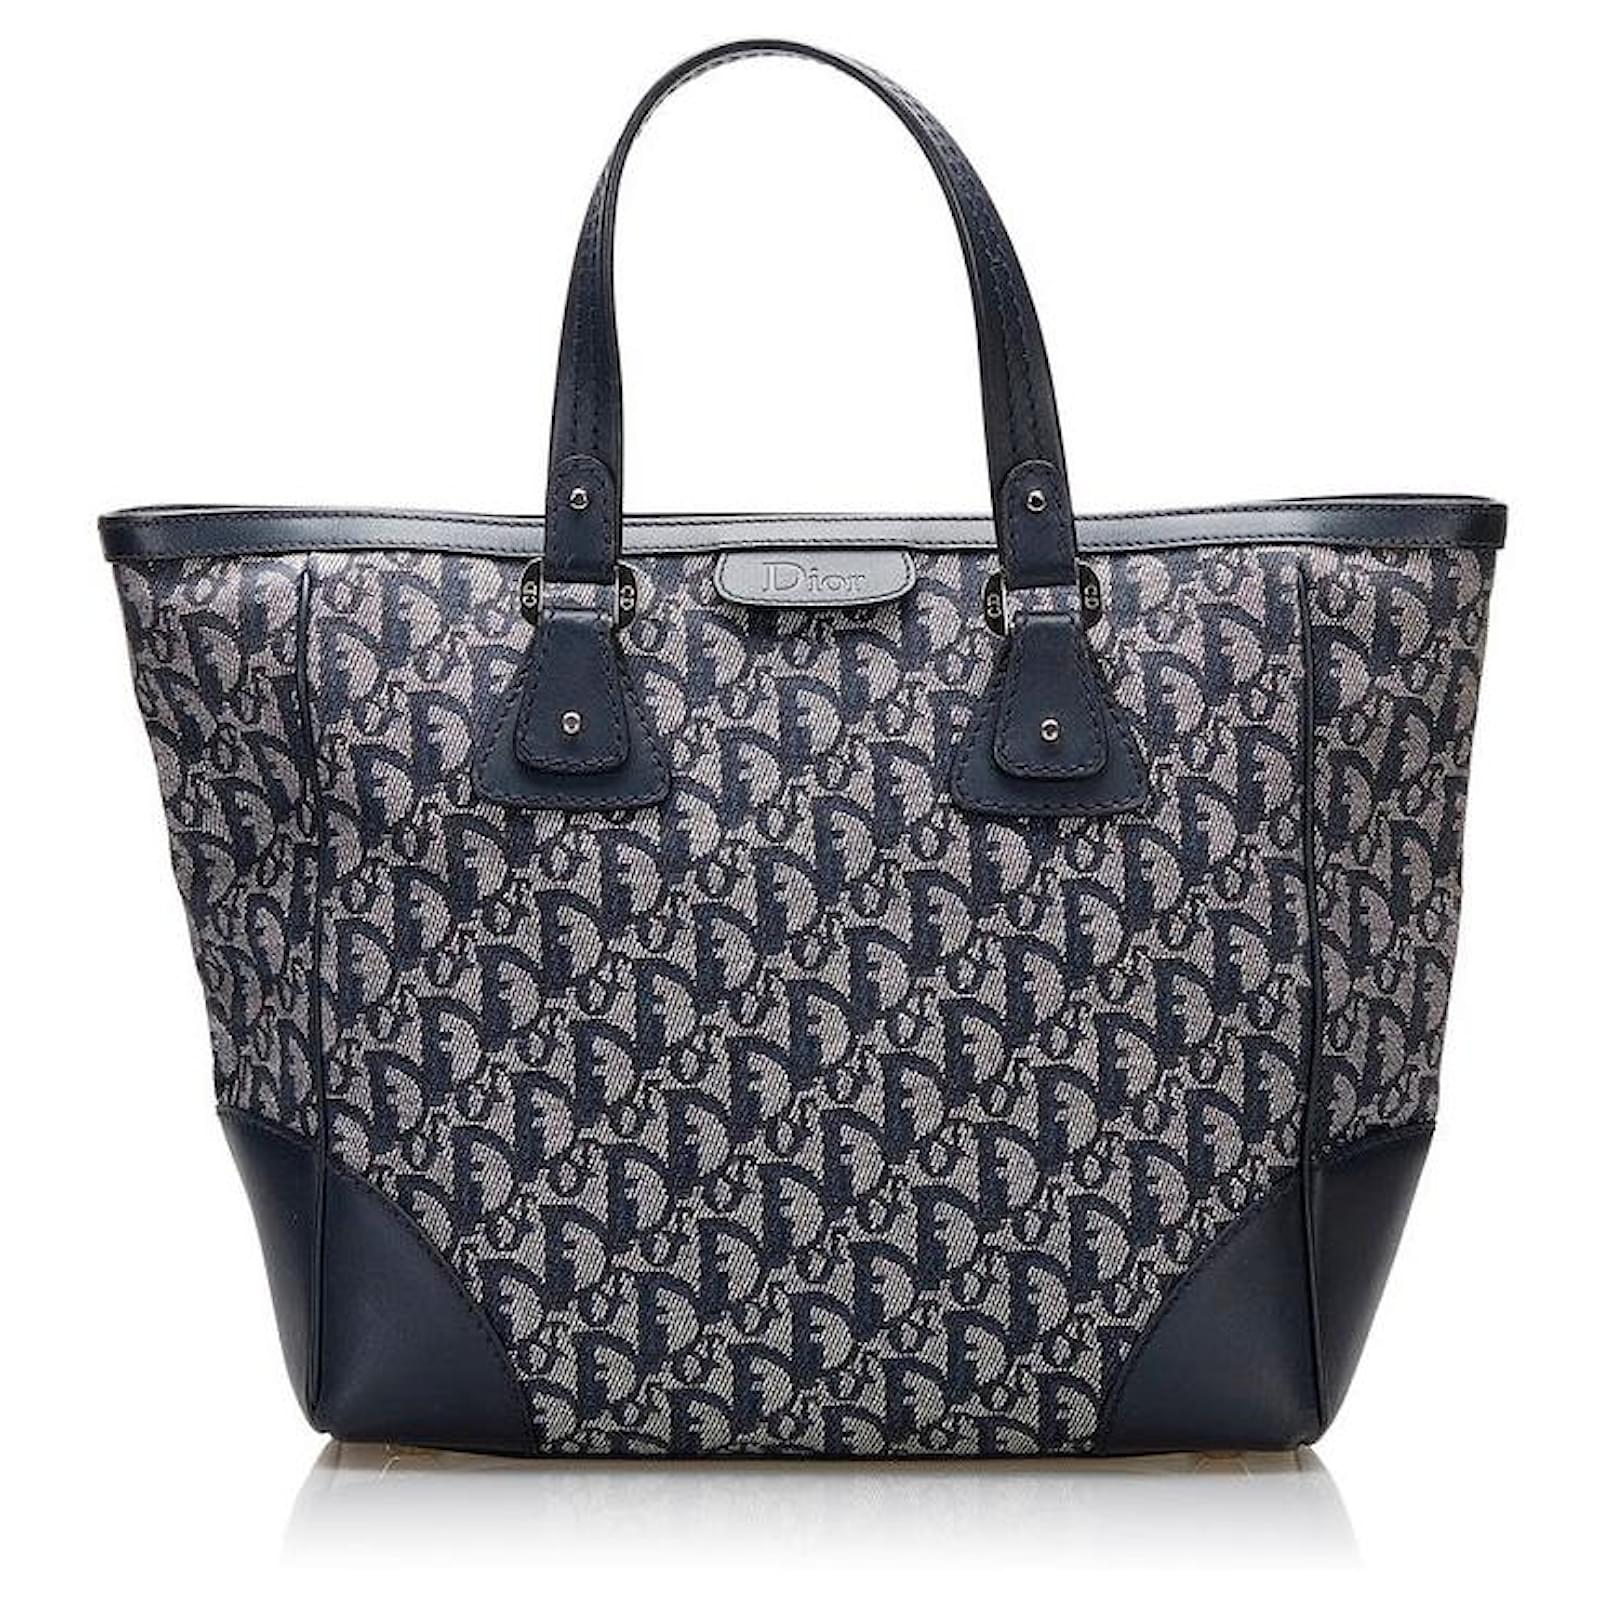 Dior Blue Bags & Handbags for Women, Authenticity Guaranteed